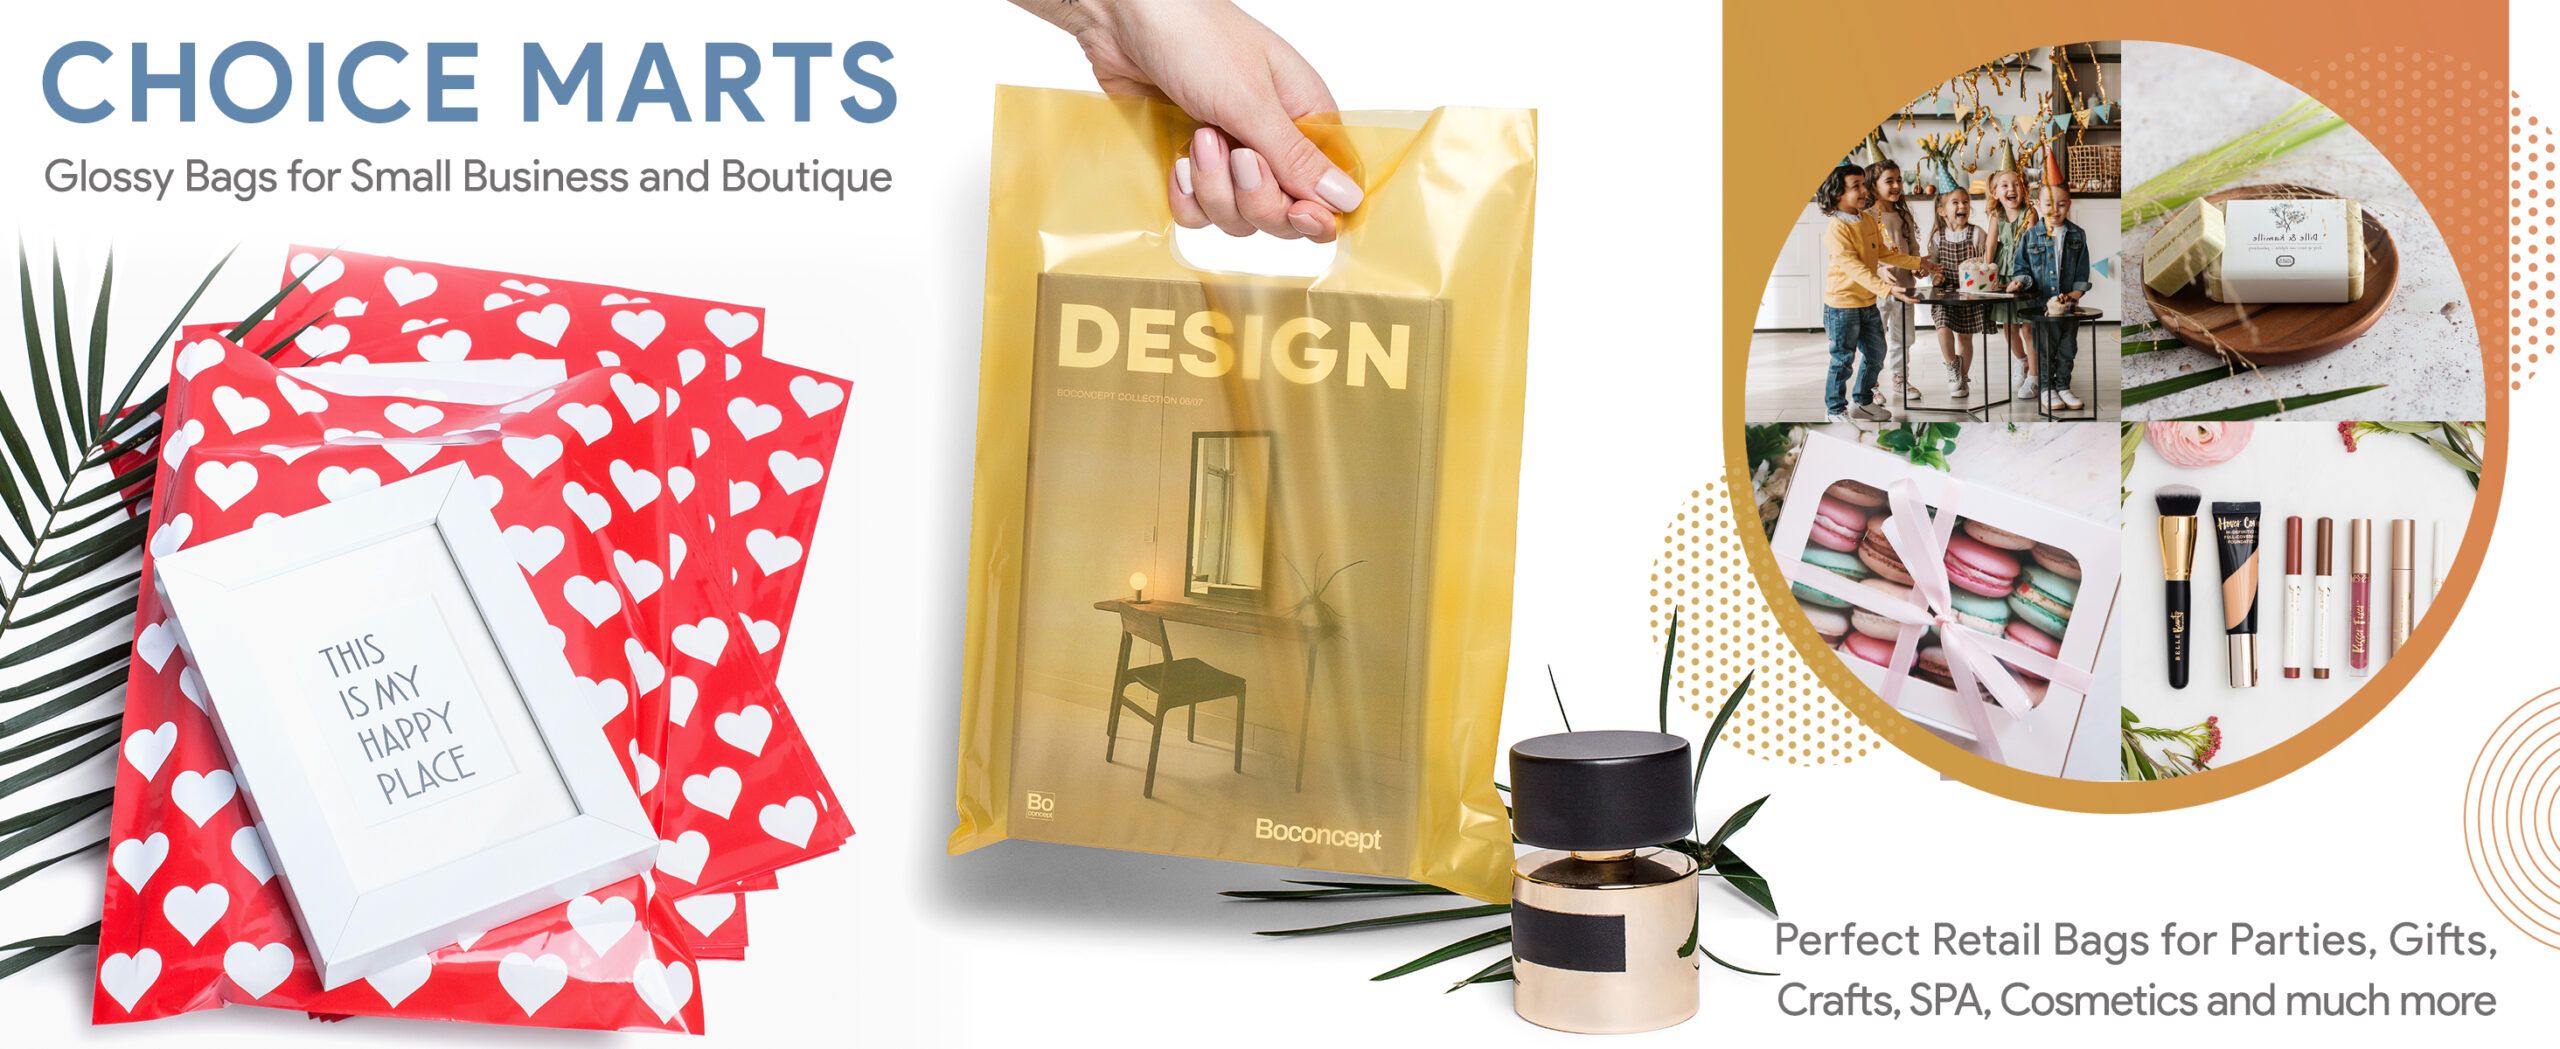 MERCHANDISE BAGS – Perfect as thank you bags, return gifts, boutique bags, retail bags, plastic gift bags, cosmetics, store bags, party favors, shopping bags for small business, wholesale and bulk purchasing